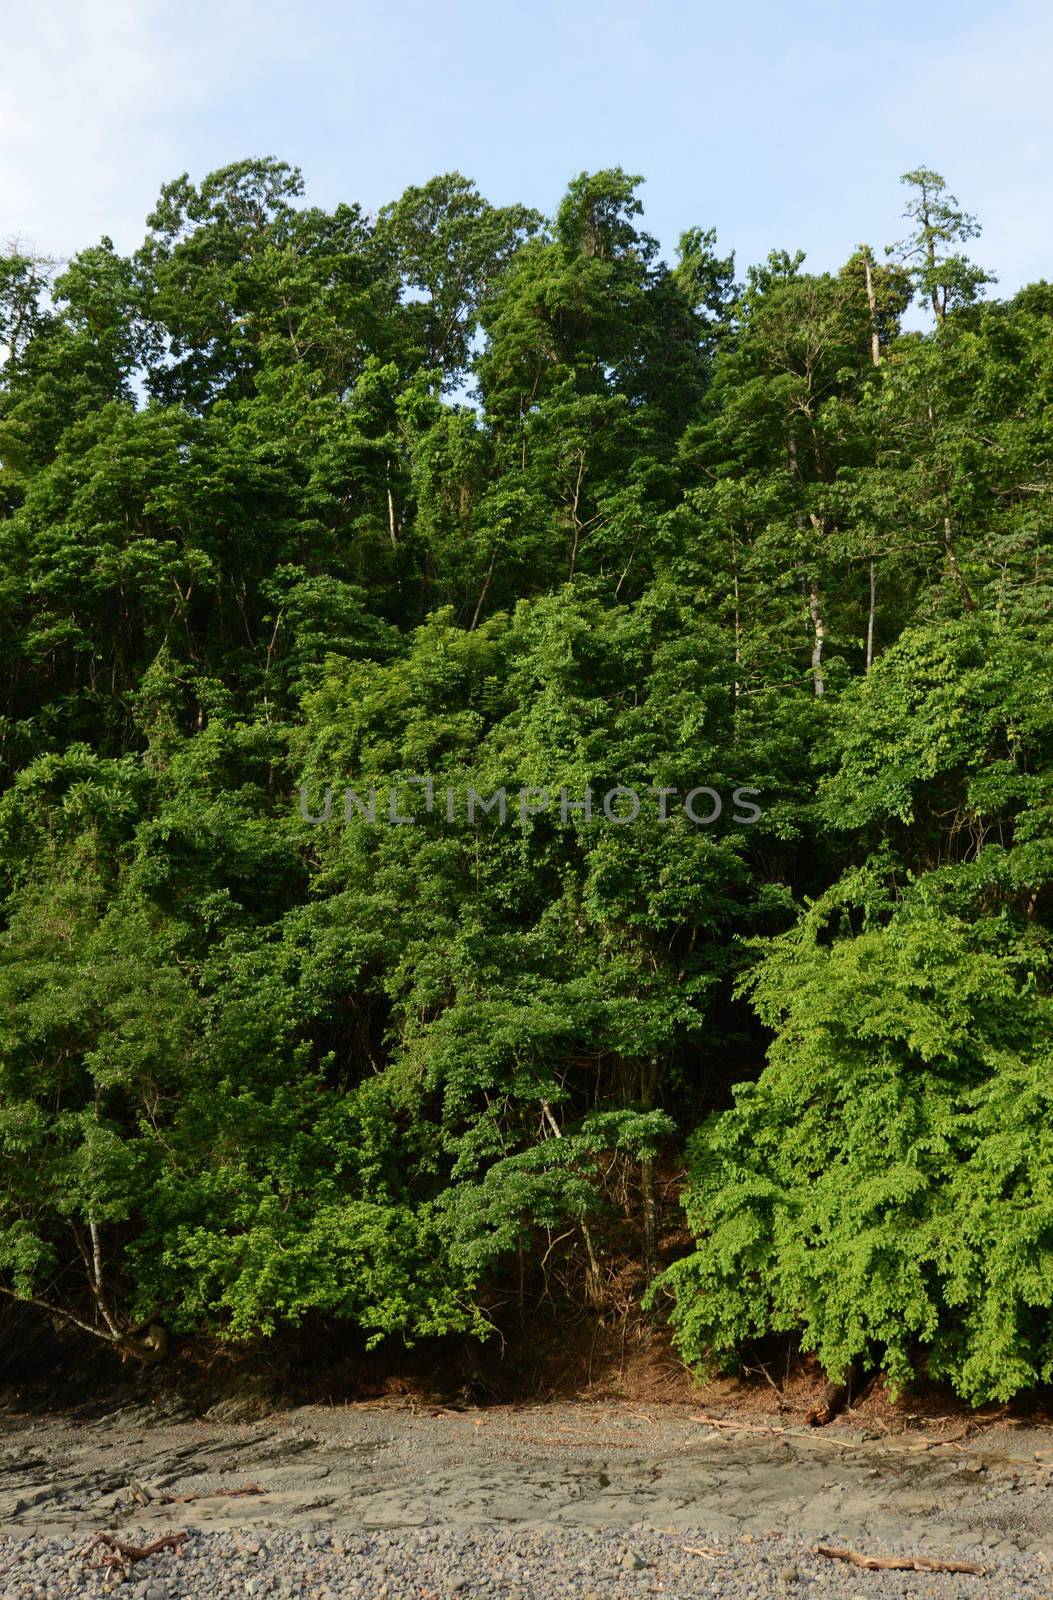 The wilderness and trees in tropical rainforest in Panama